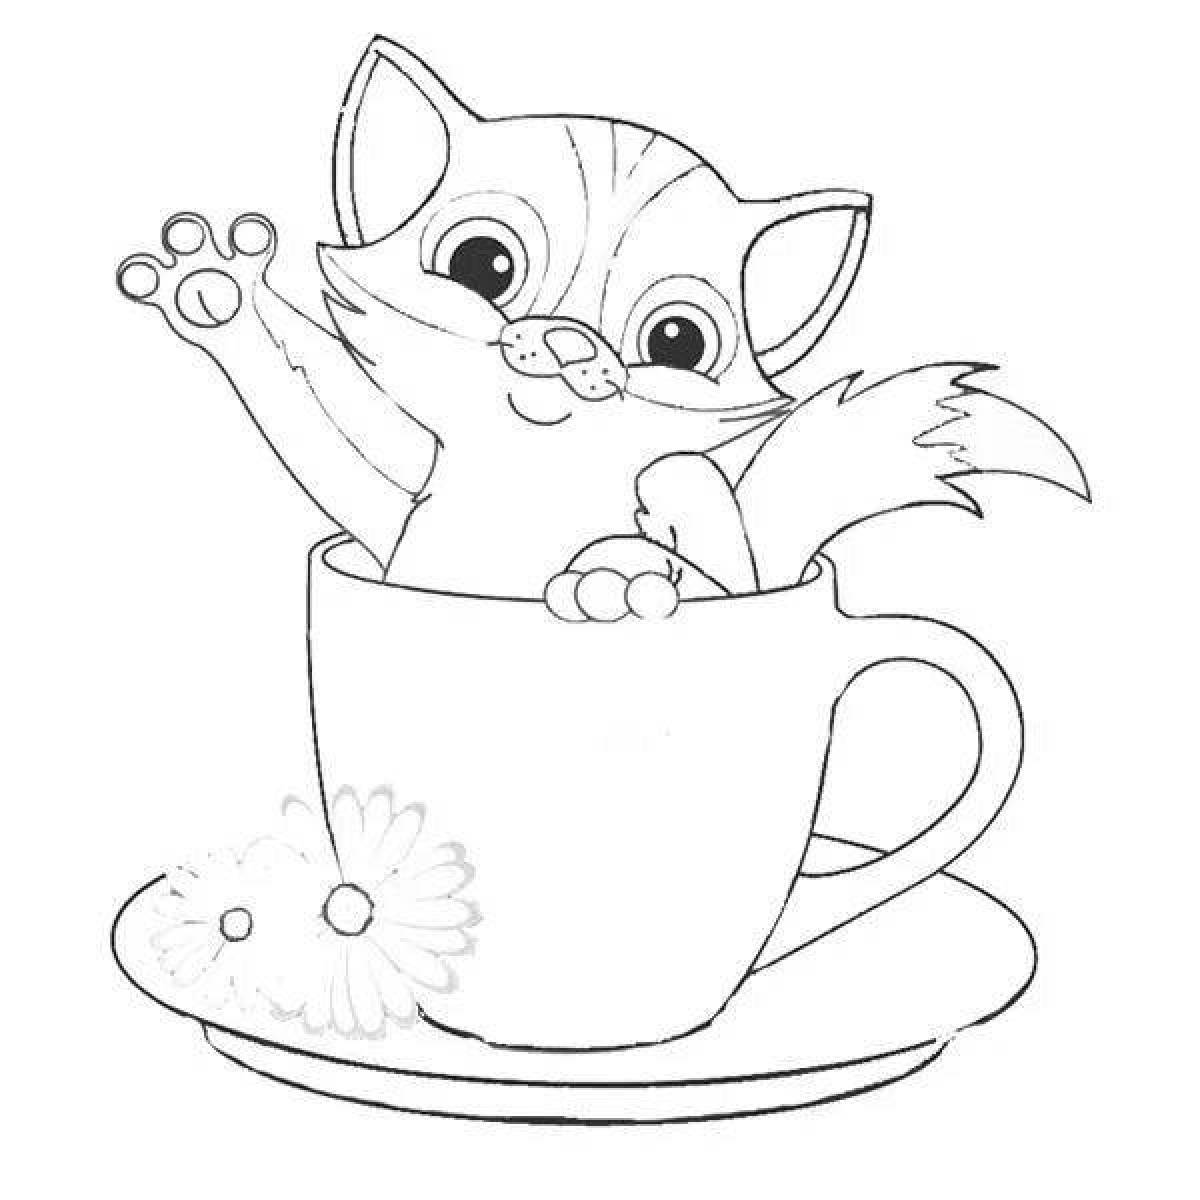 Coloring page cute cat in a mug